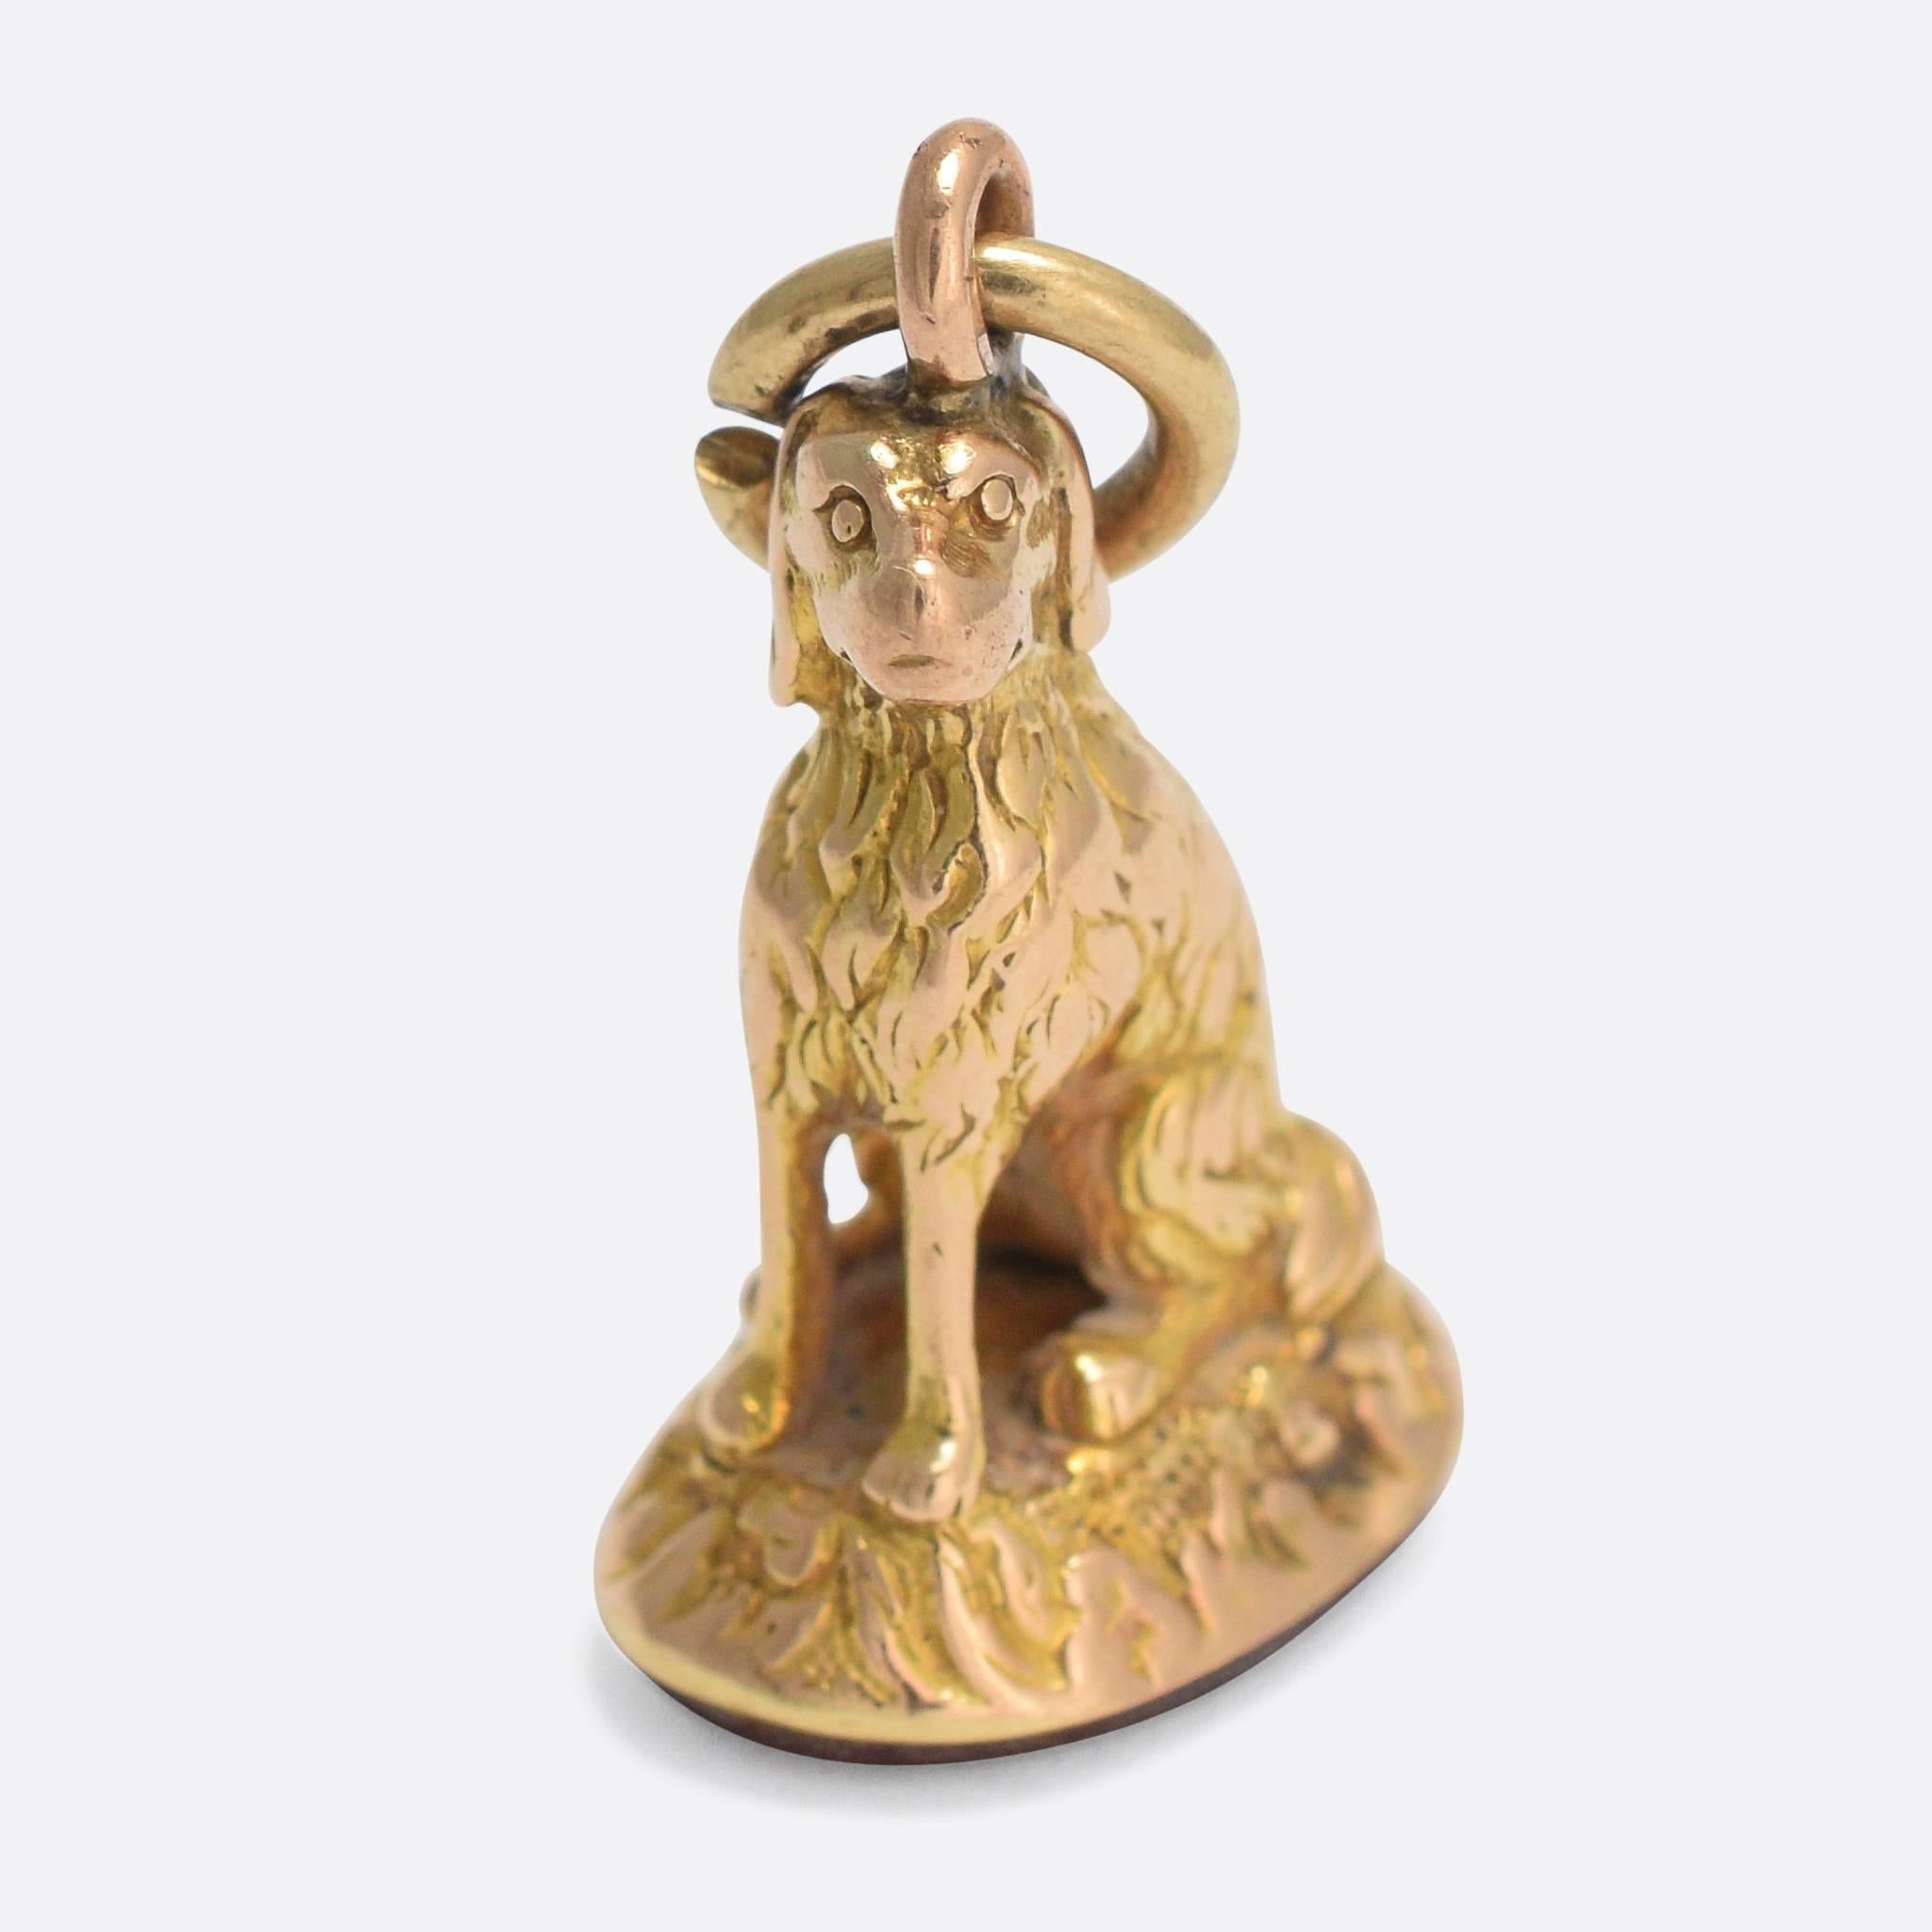 A charming antique seal fob set with an uncarved carnelian panel. The fob itself is modelled in 15k gold, and has been made in the form of a dog - with exceptional hand-chased fur detailing. A wonderful late Georgian piece, ideal for wear on a fine